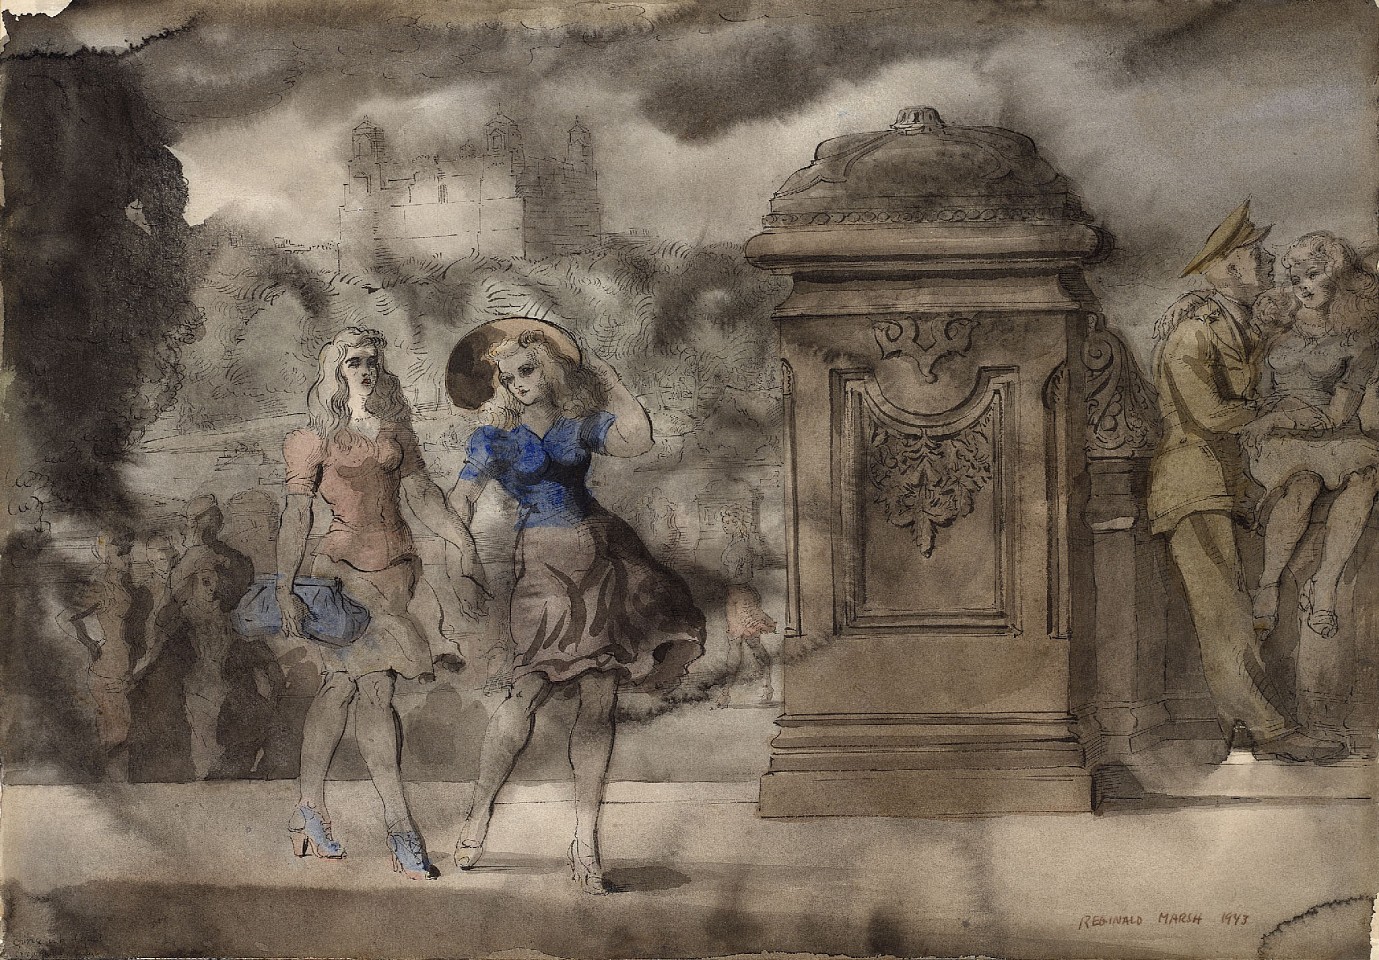 Reginald Marsh, Walking in the Park, 1943
Chinese ink and watercolor on paper, 14 x 19 15/16 in. (35.6 x 50.6 cm)
RM190401